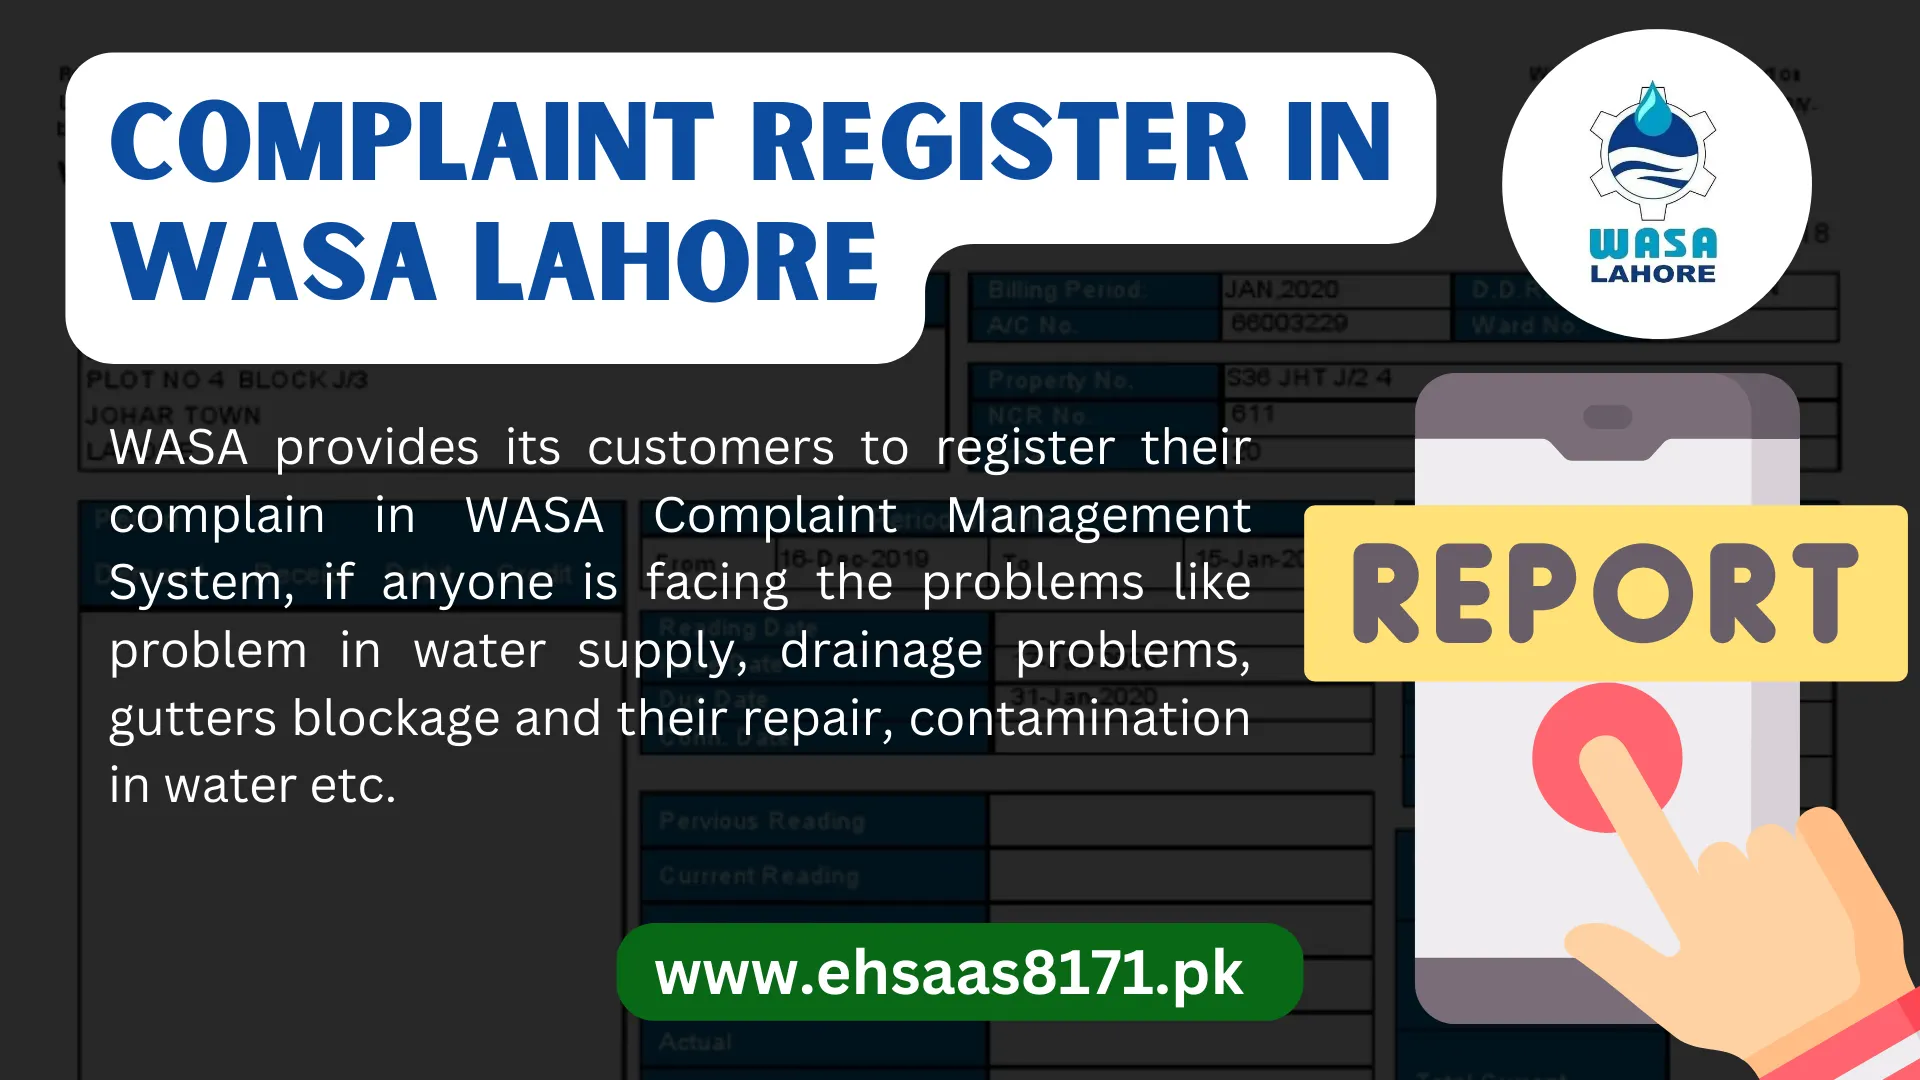 Complaint Register in WASA Lahore